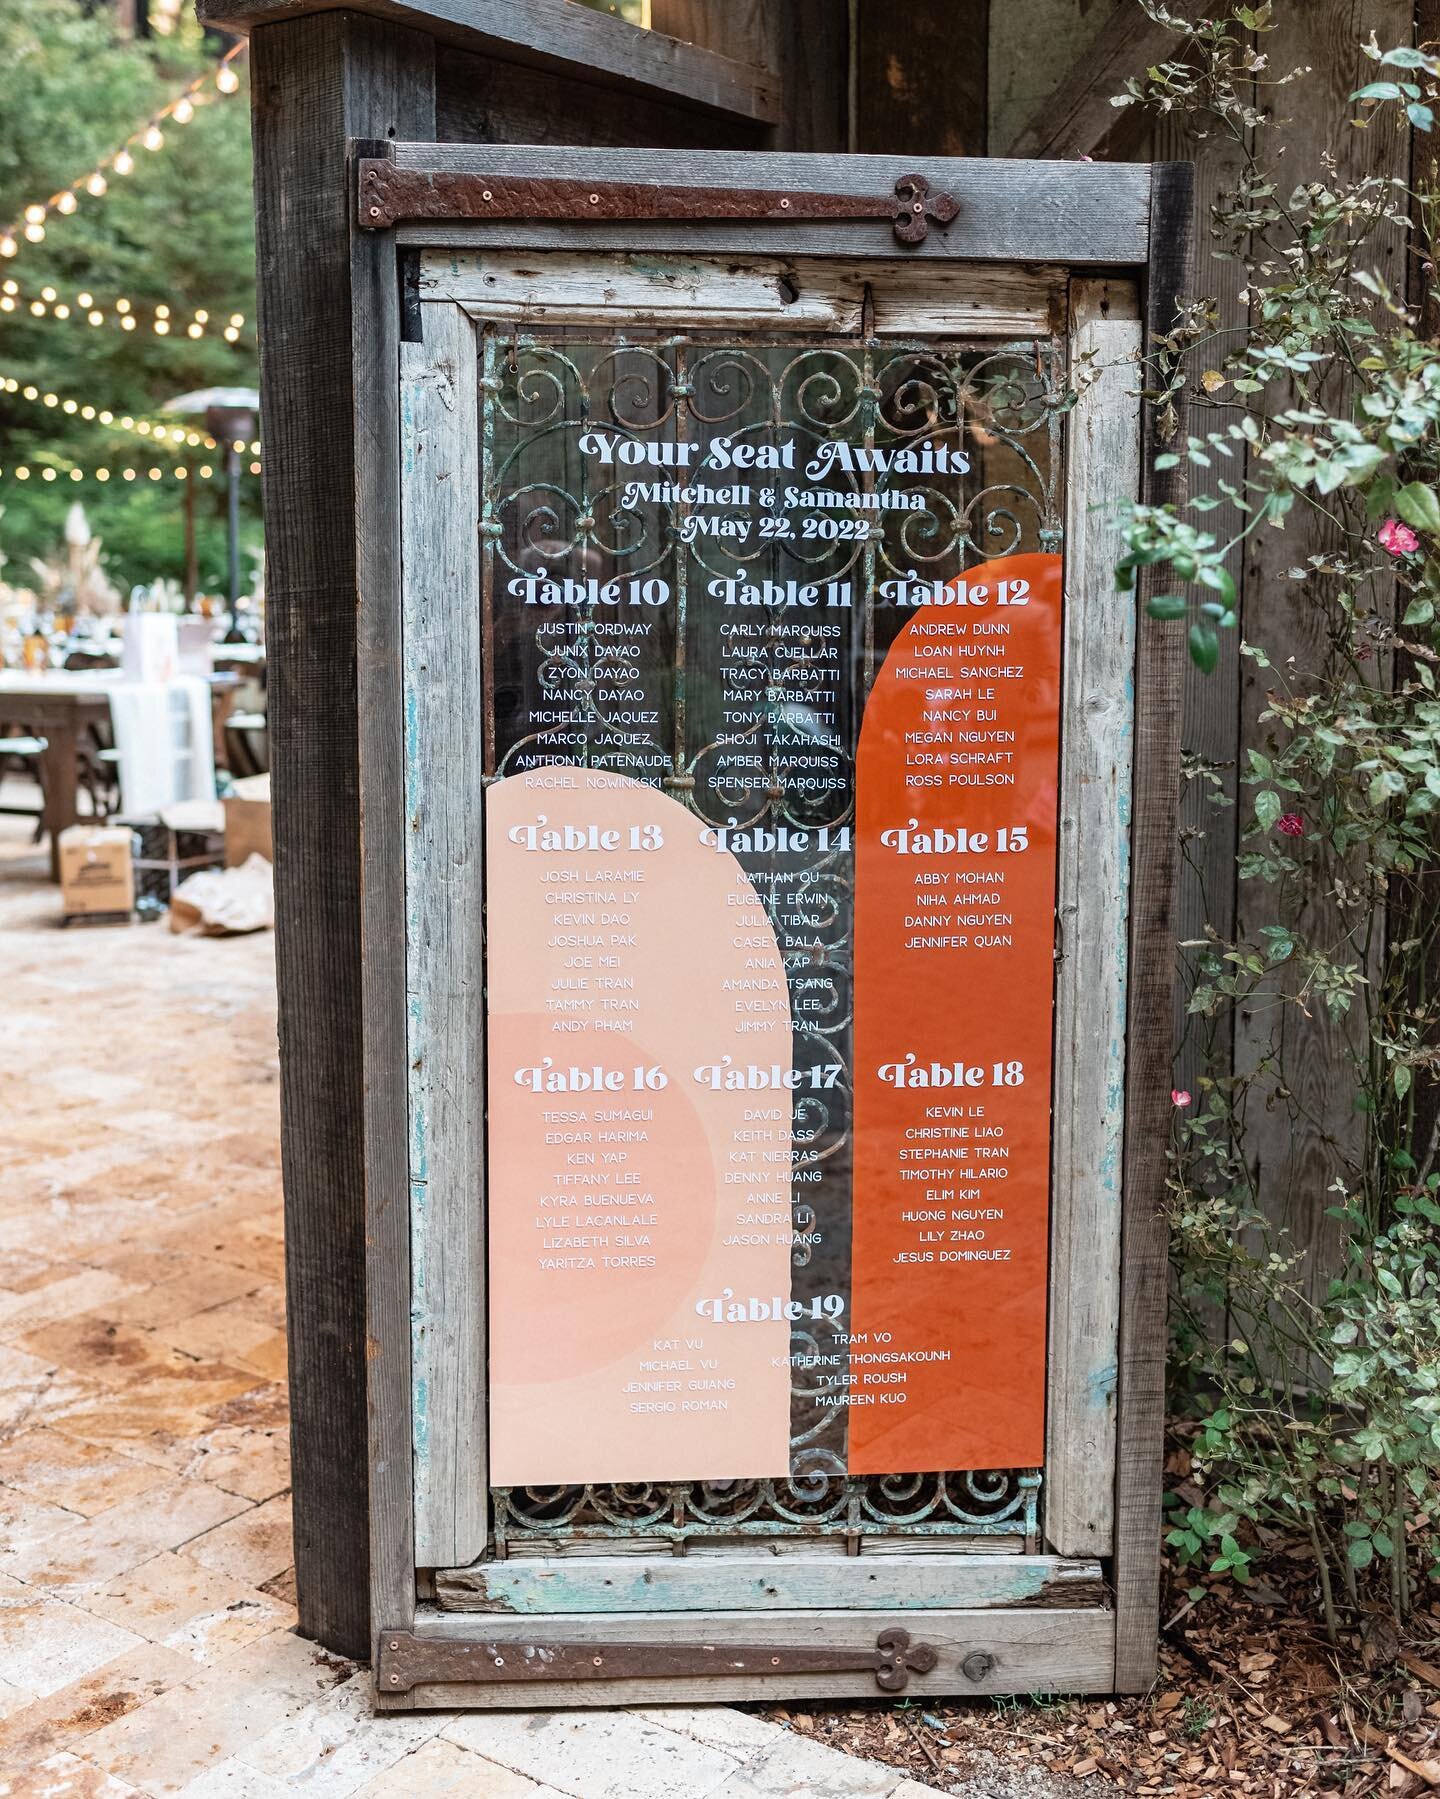 All the retro feels here! 🤩 loved the 2 piece seating chart on the gate! Also I&rsquo;m loving the &ldquo;can we have our pets on all signage&rdquo; trend 🤣🤣🤣Such a beautiful wedding for a beautiful couple!  Photographer: @russlevi 
Planning/Desi